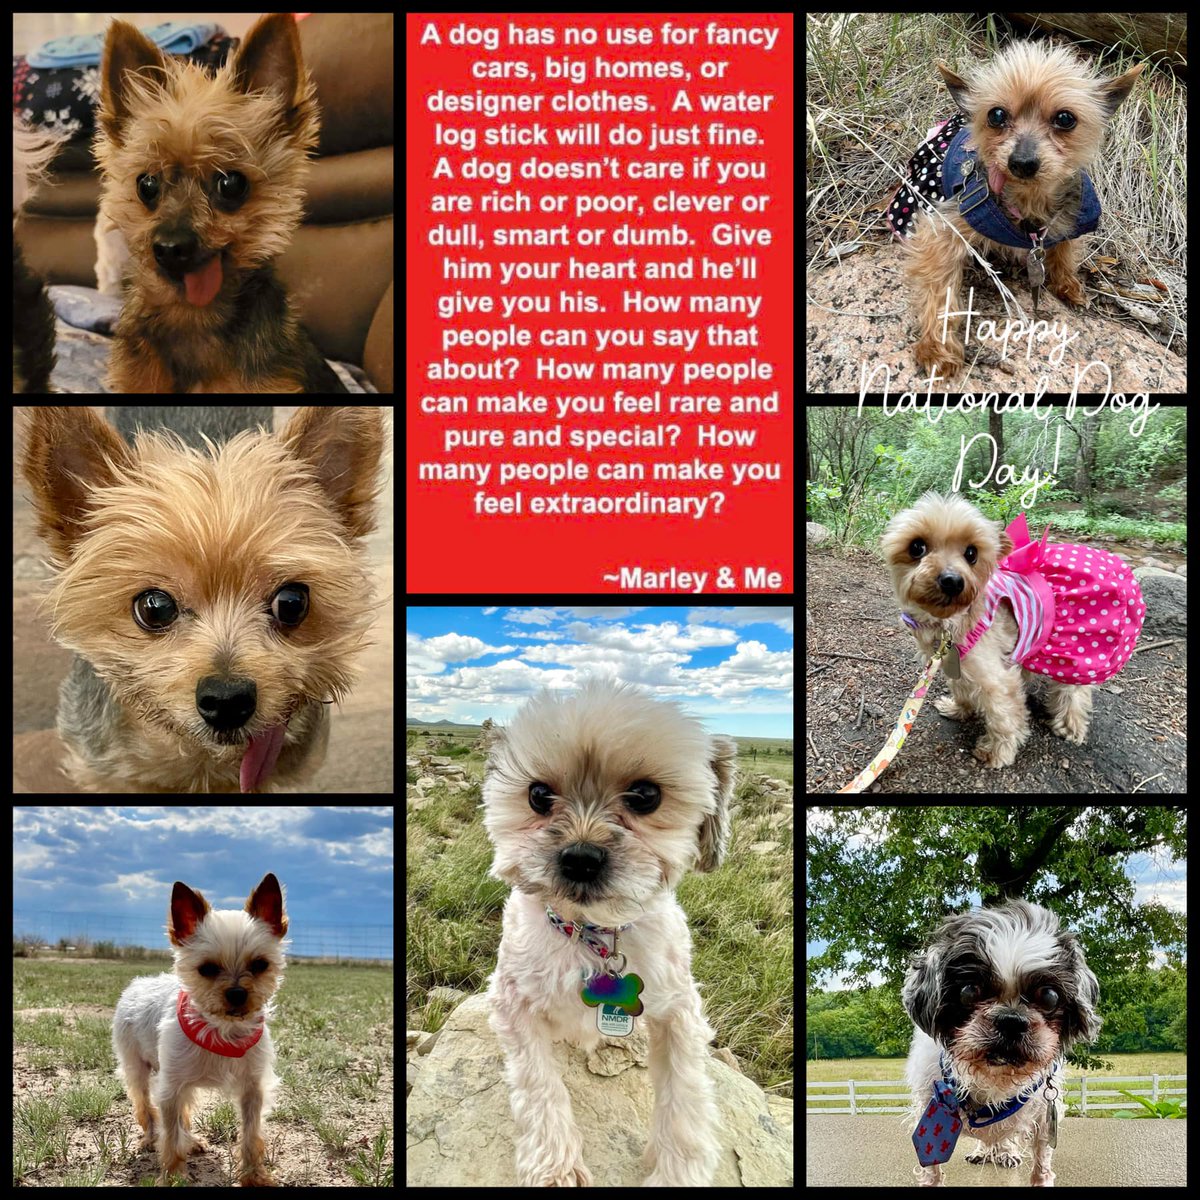 Happy International Dog Day 🐾 These faces are everything! #InternationalDogDay #RescueDog #furryfriends #BFF #AdoptDontShop #SaturdayVibes #DogsofTwitter #LoveWins #ColoradoSprings nmdr.org